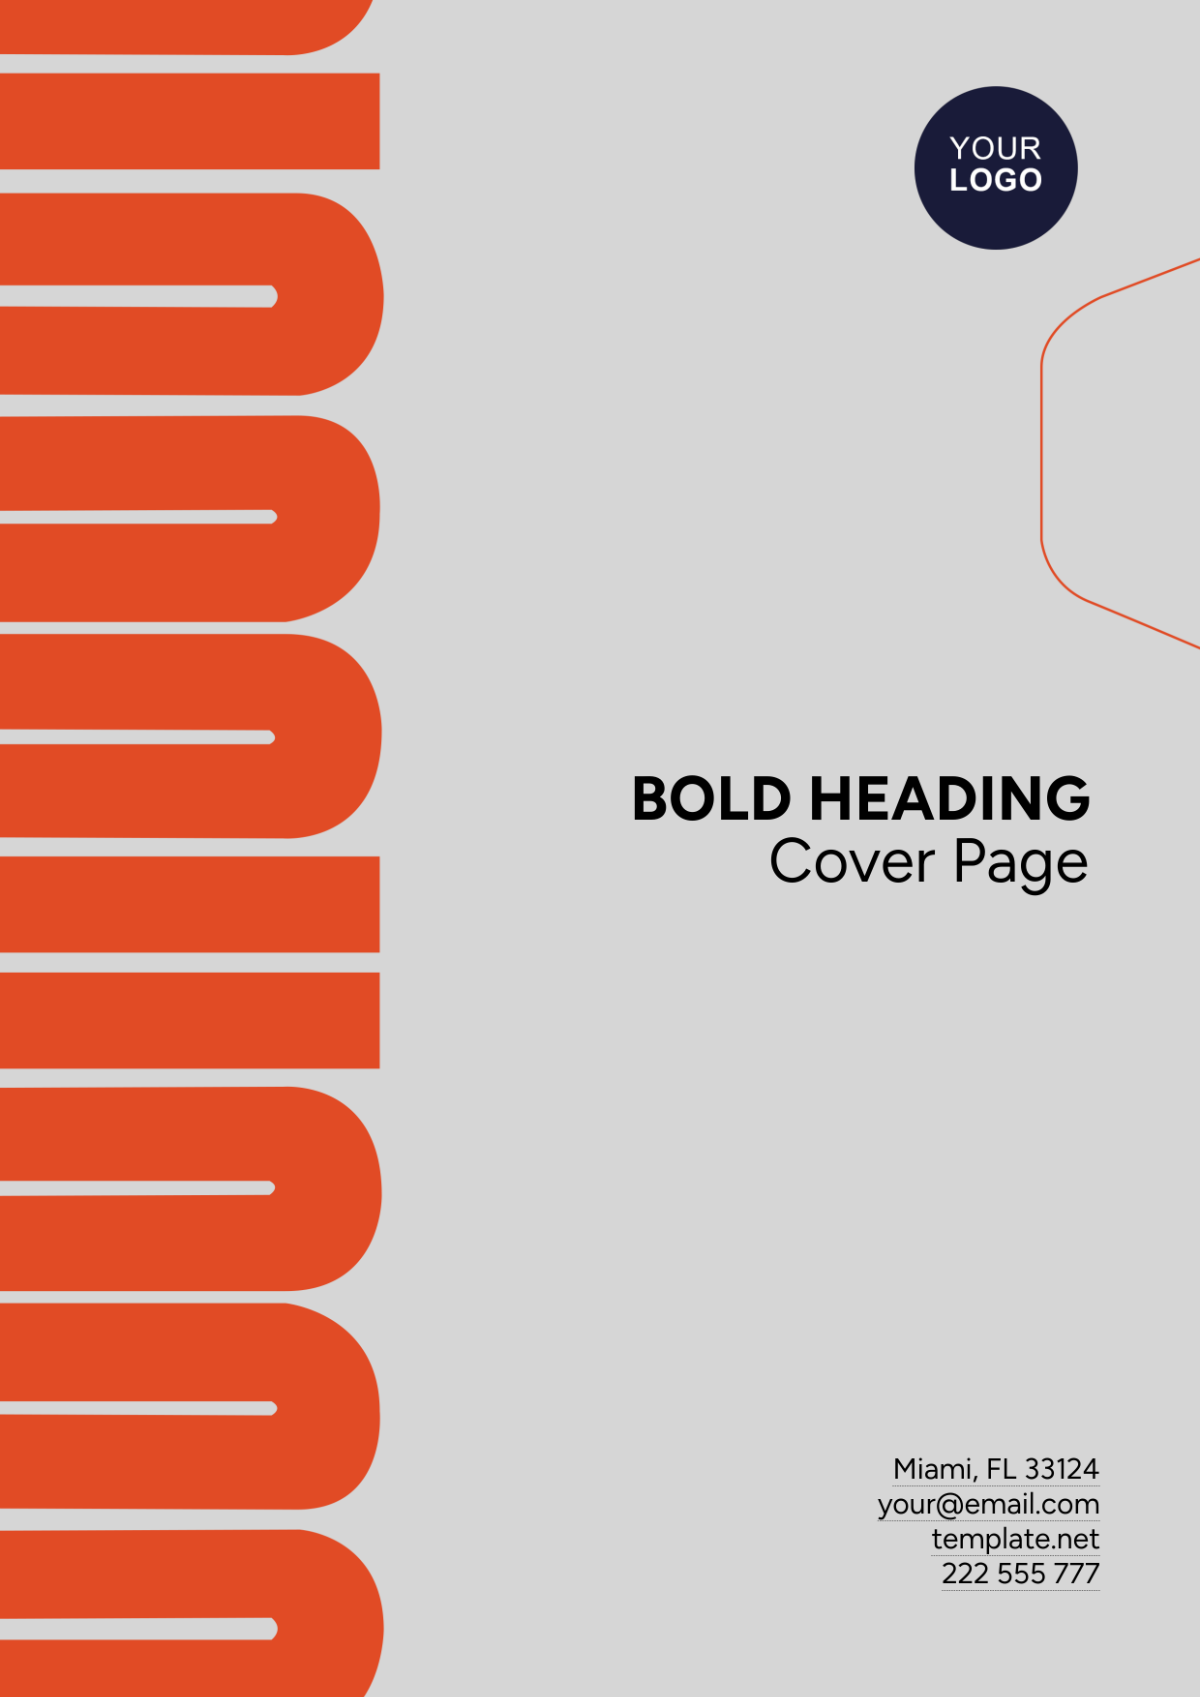 Bold Heading Cover Page Template